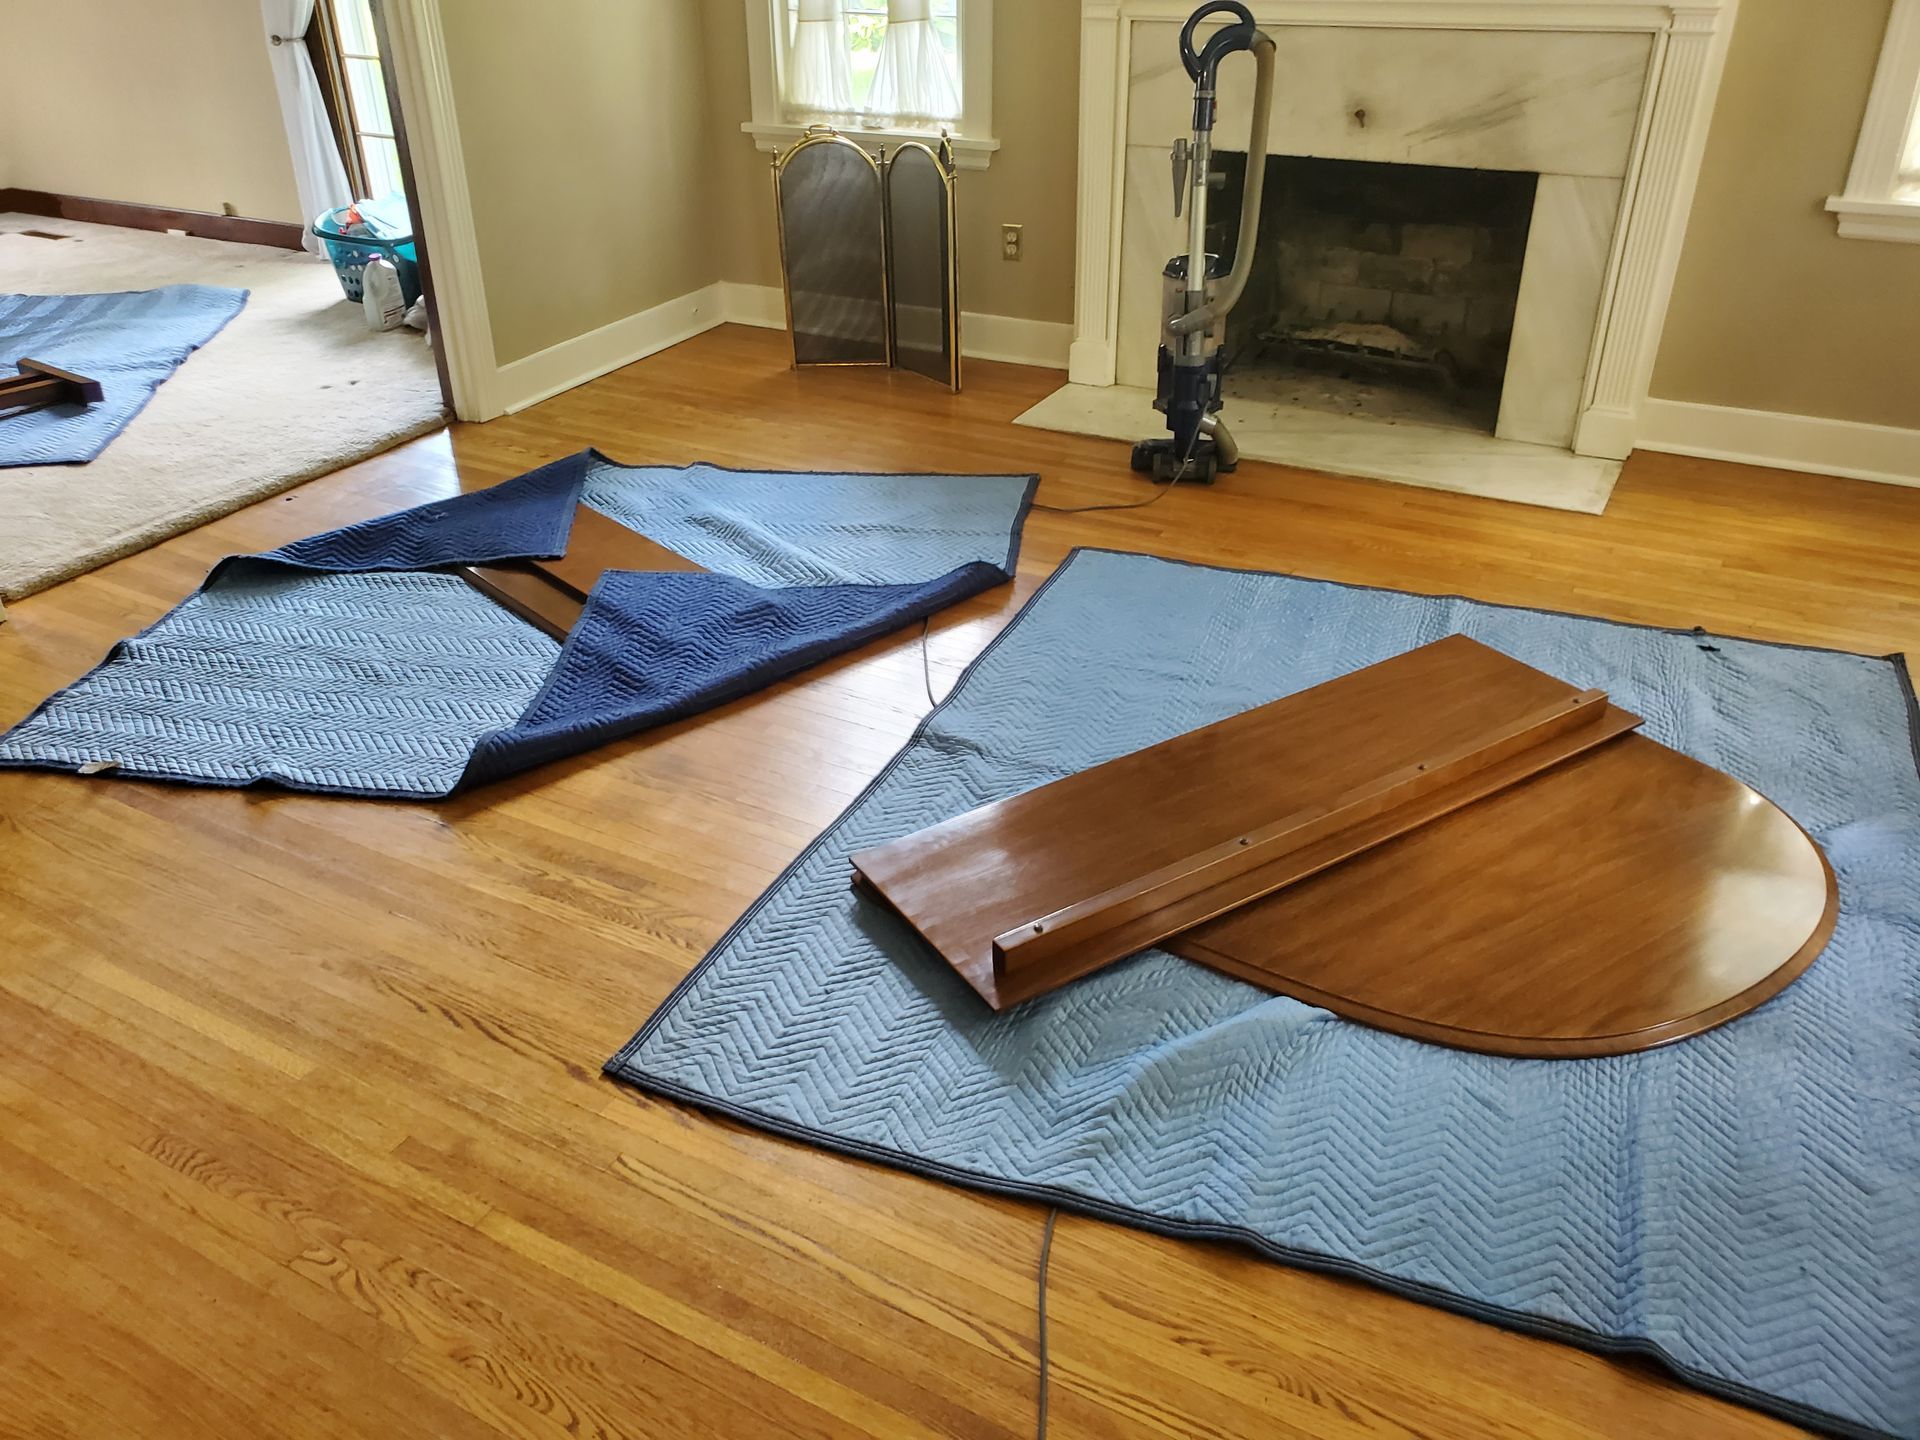 a wooden table is sitting on a blue blanket in a living room.